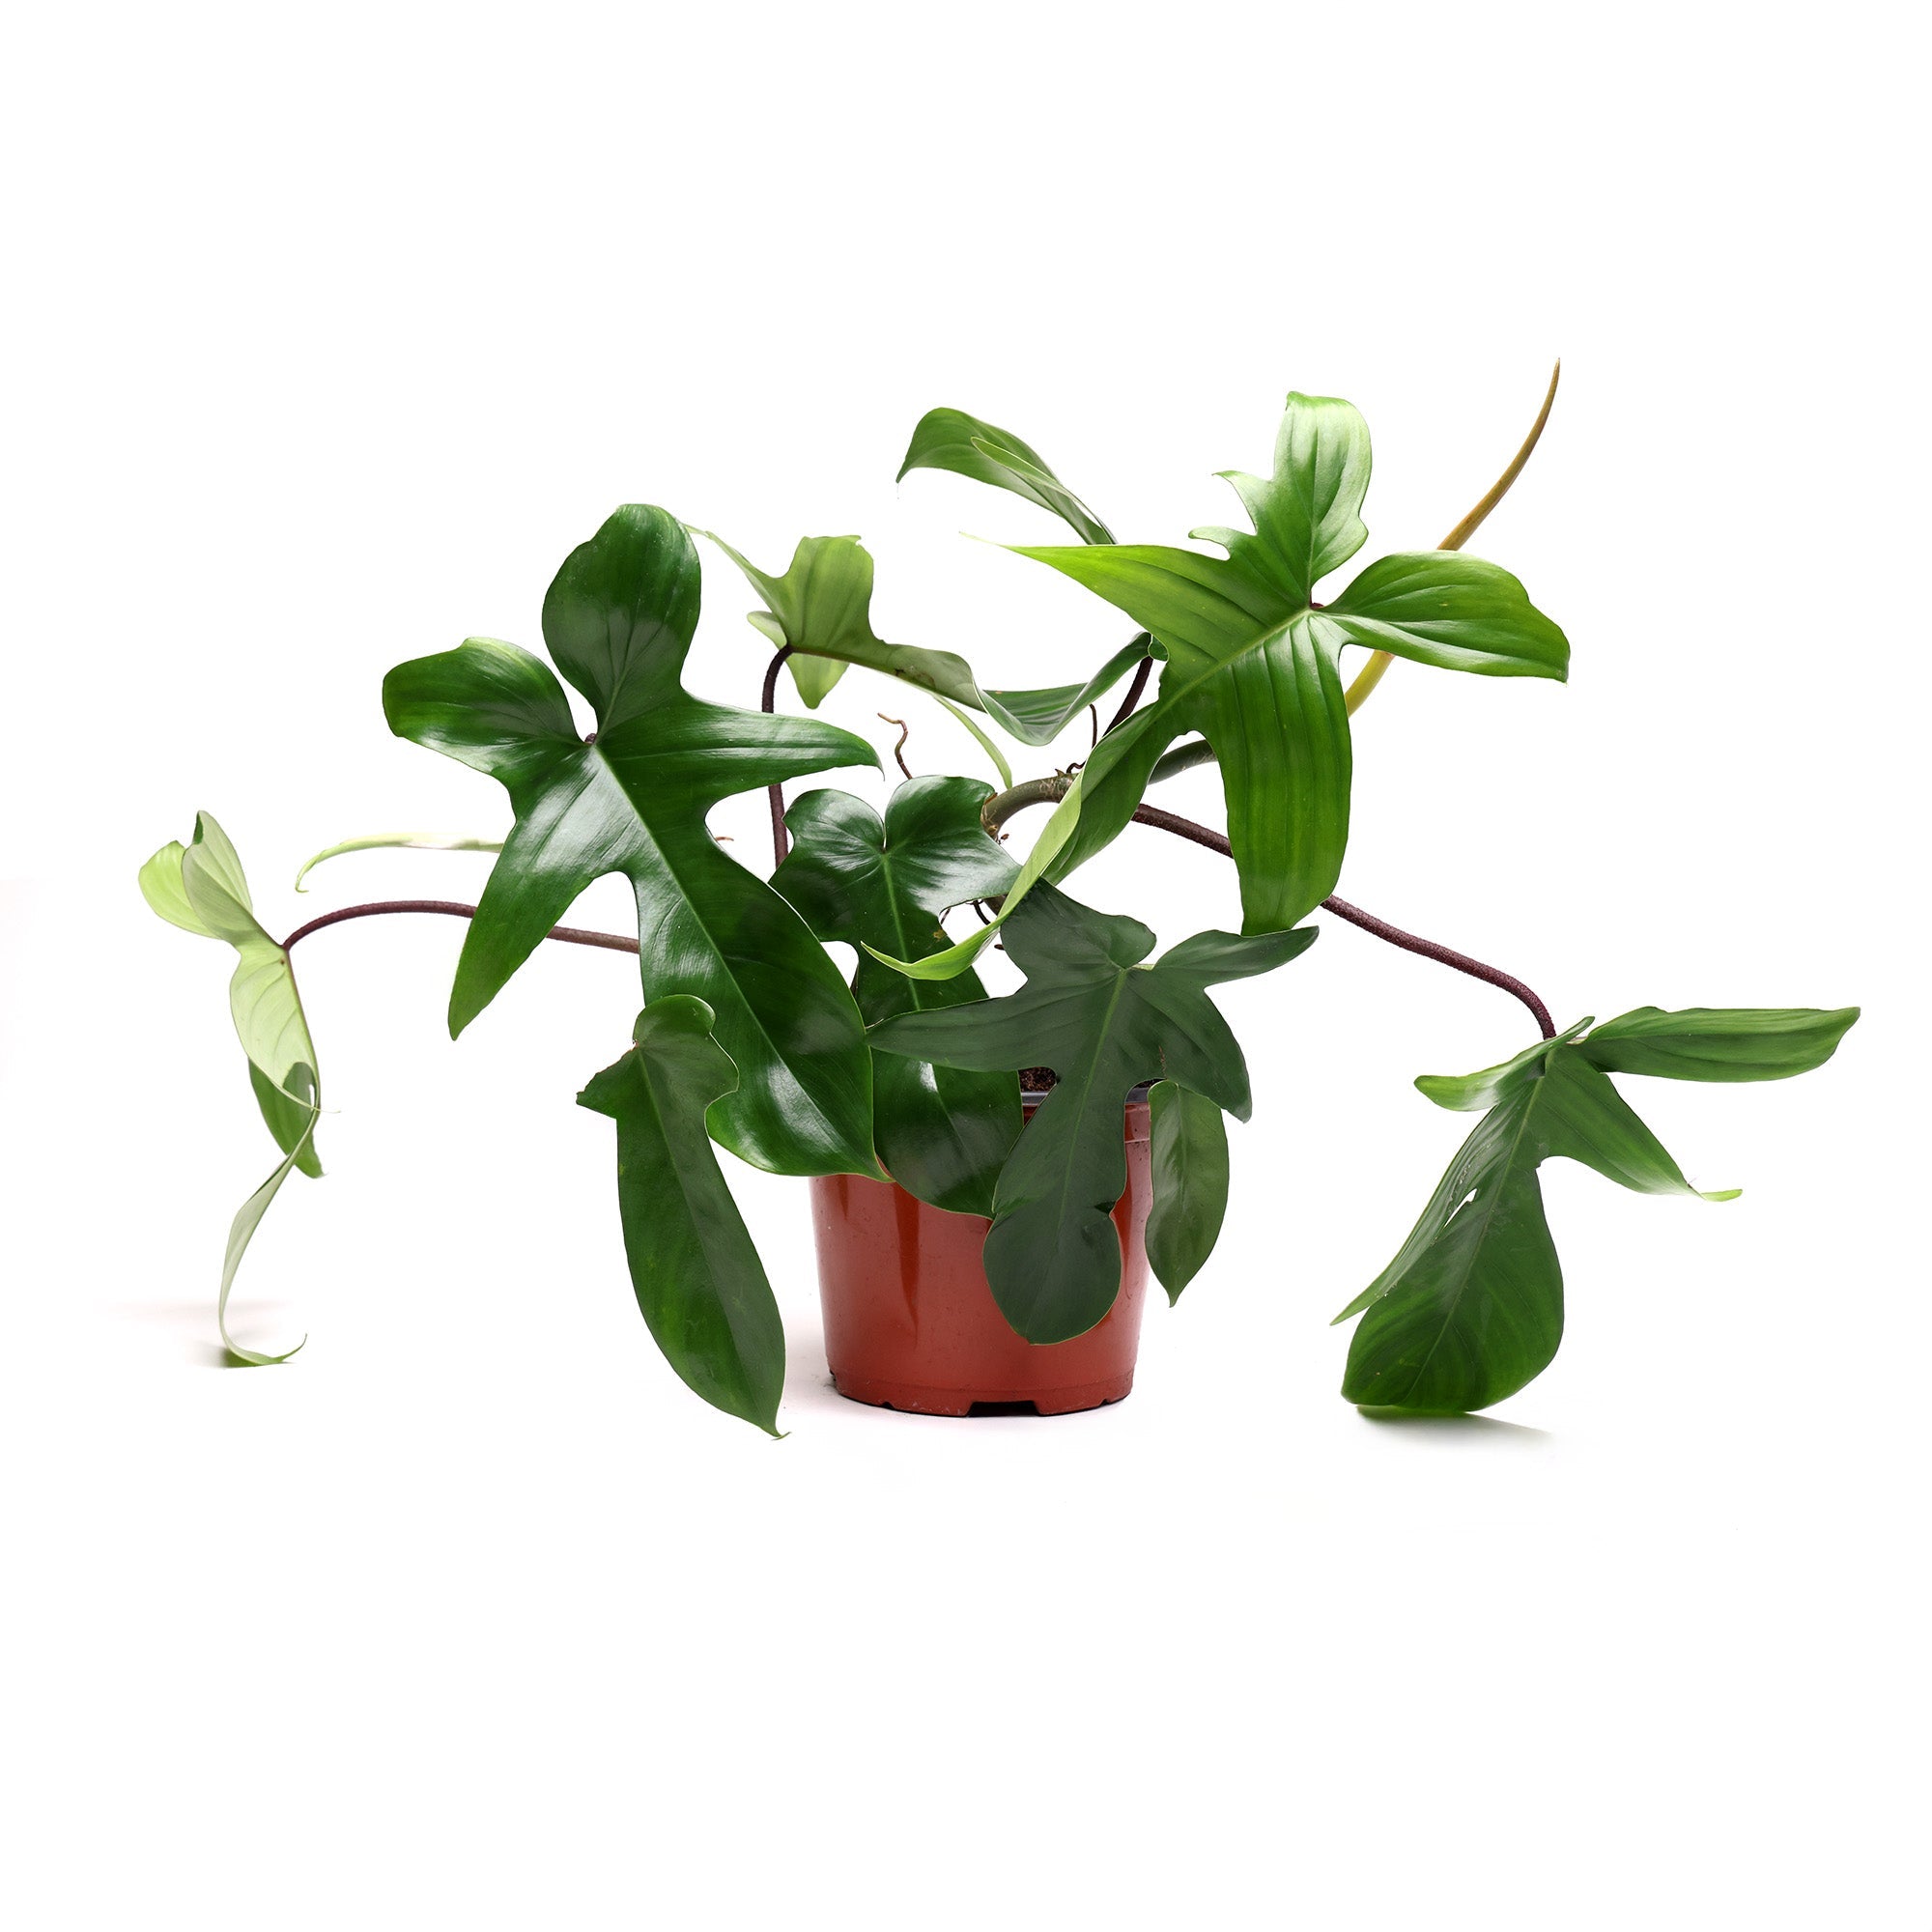 A vibrant green Philodendron Florida Green 6 Inches plant with broad leaves in a simple Chive Studio terracotta pot, isolated on a white background. The plant's vines are elegantly trailing over the pot's edges.